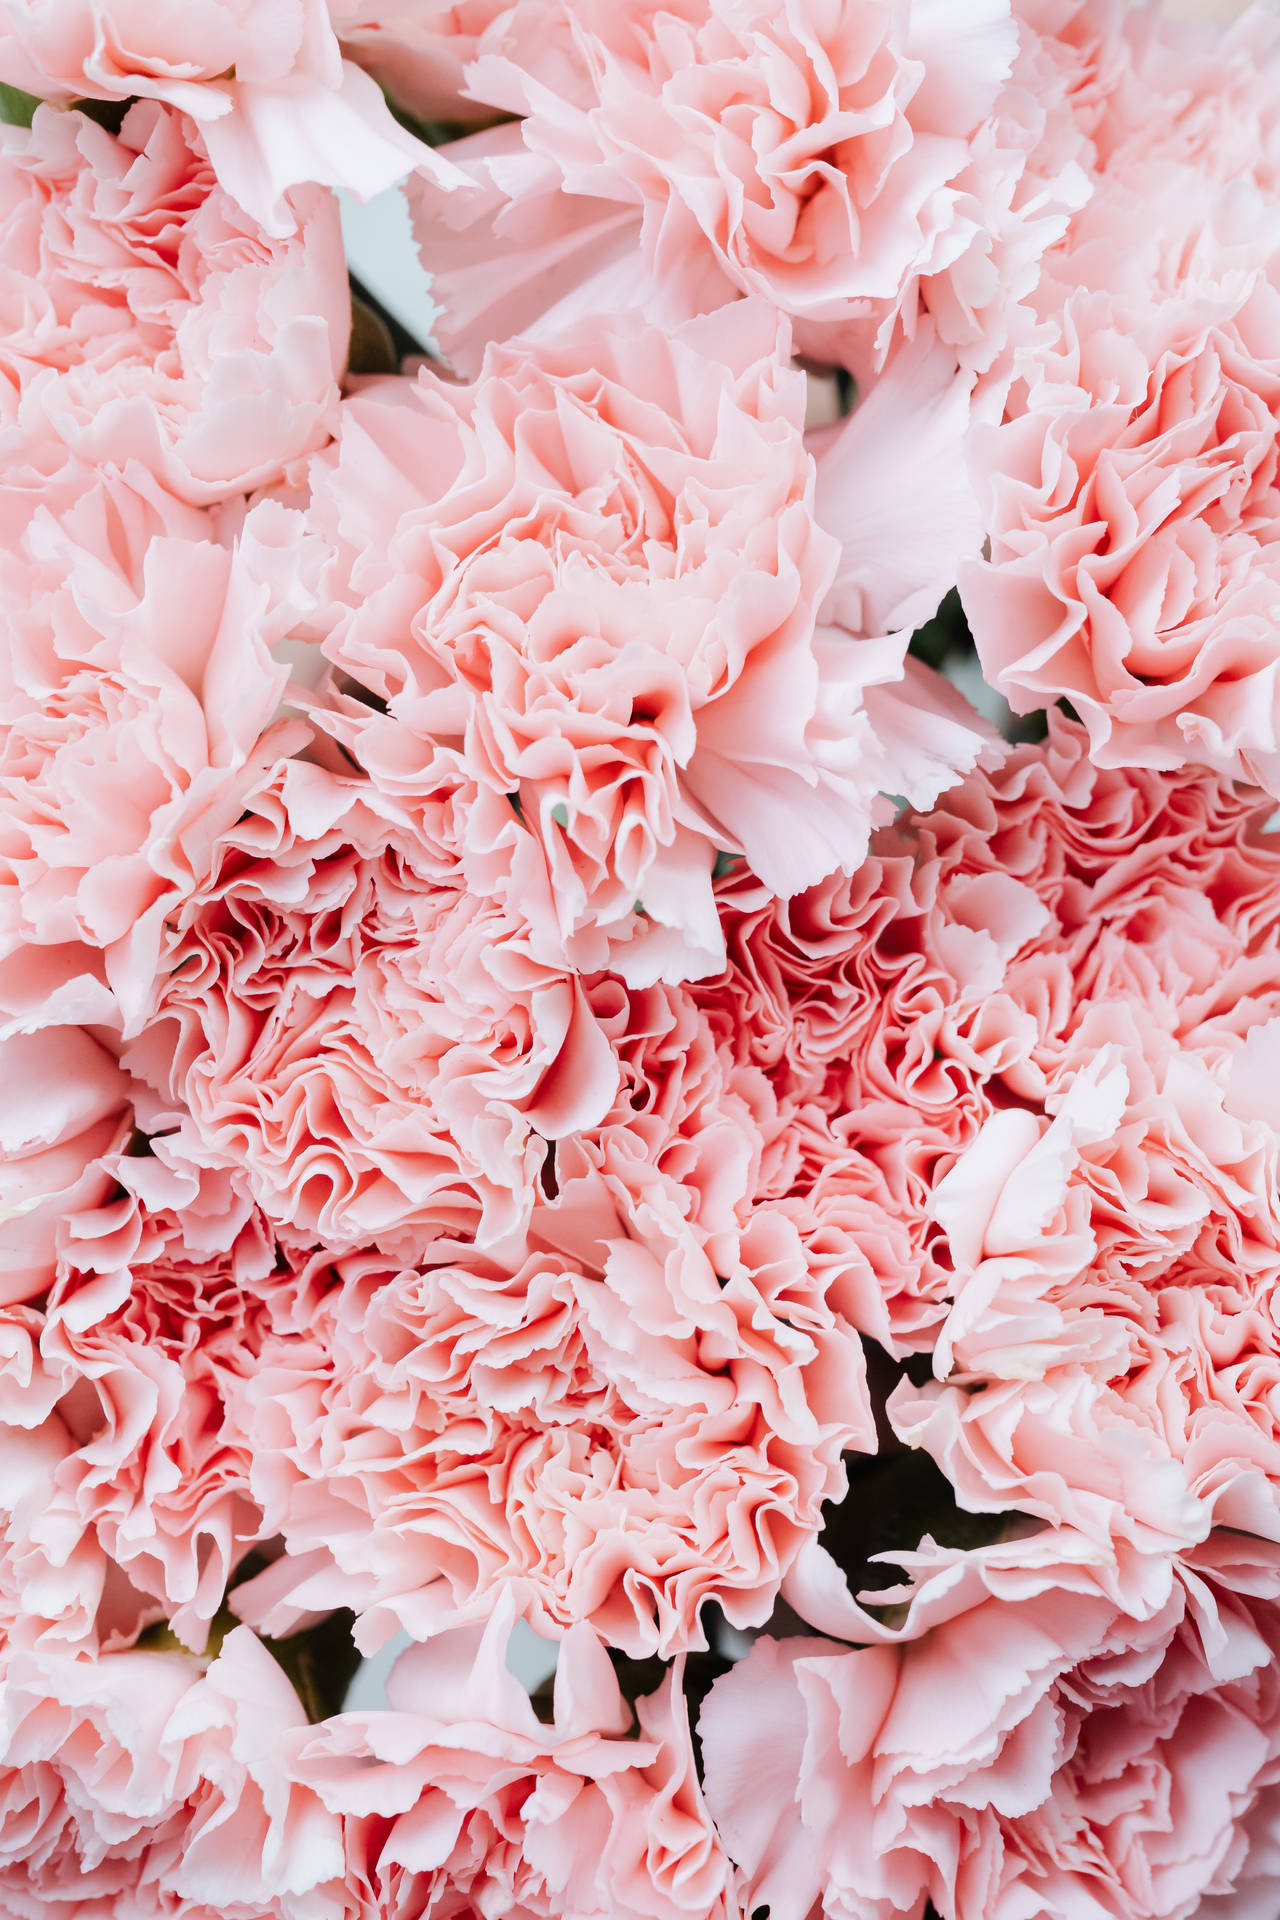 Carnation Pink Flowers Aesthetic Background